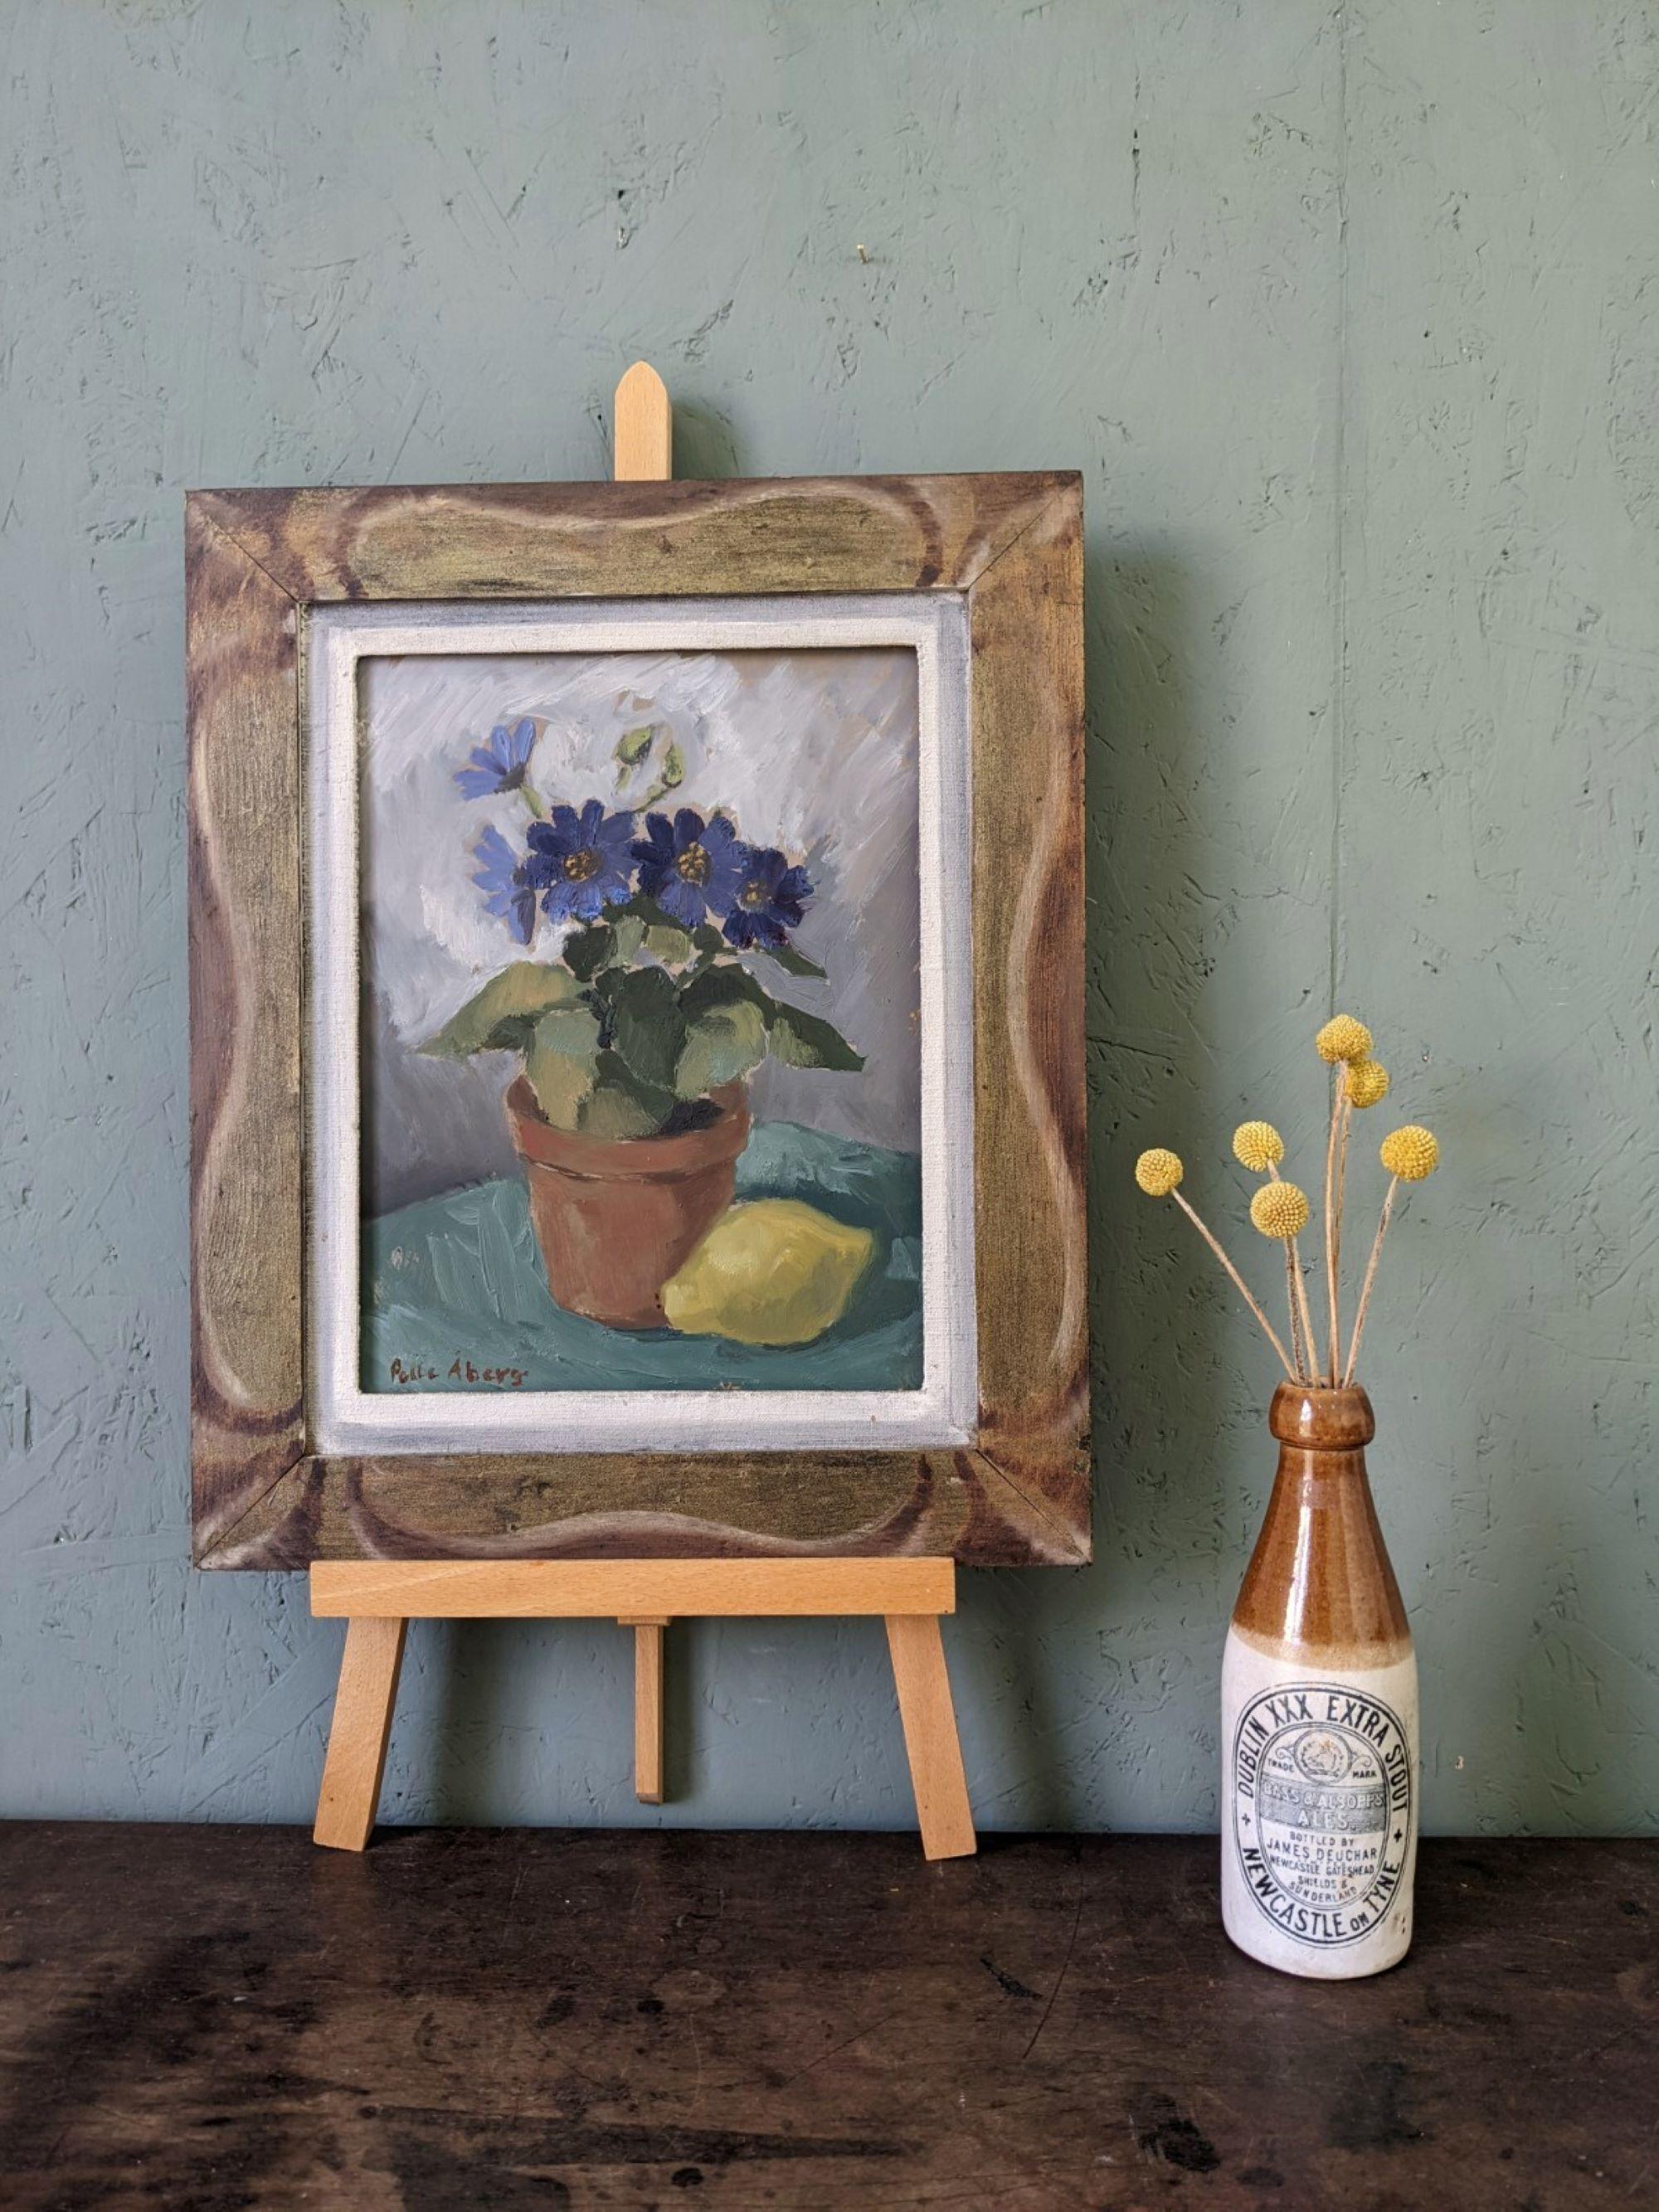 PURPLE FLOWERS
Size: 42 x 35 cm (including frame)
Oil on board

An elegant and alluring mid-century still life composition, executed in oil onto board.

Set against a soft greyish-white background, a charming arrangement takes centre stage featuring